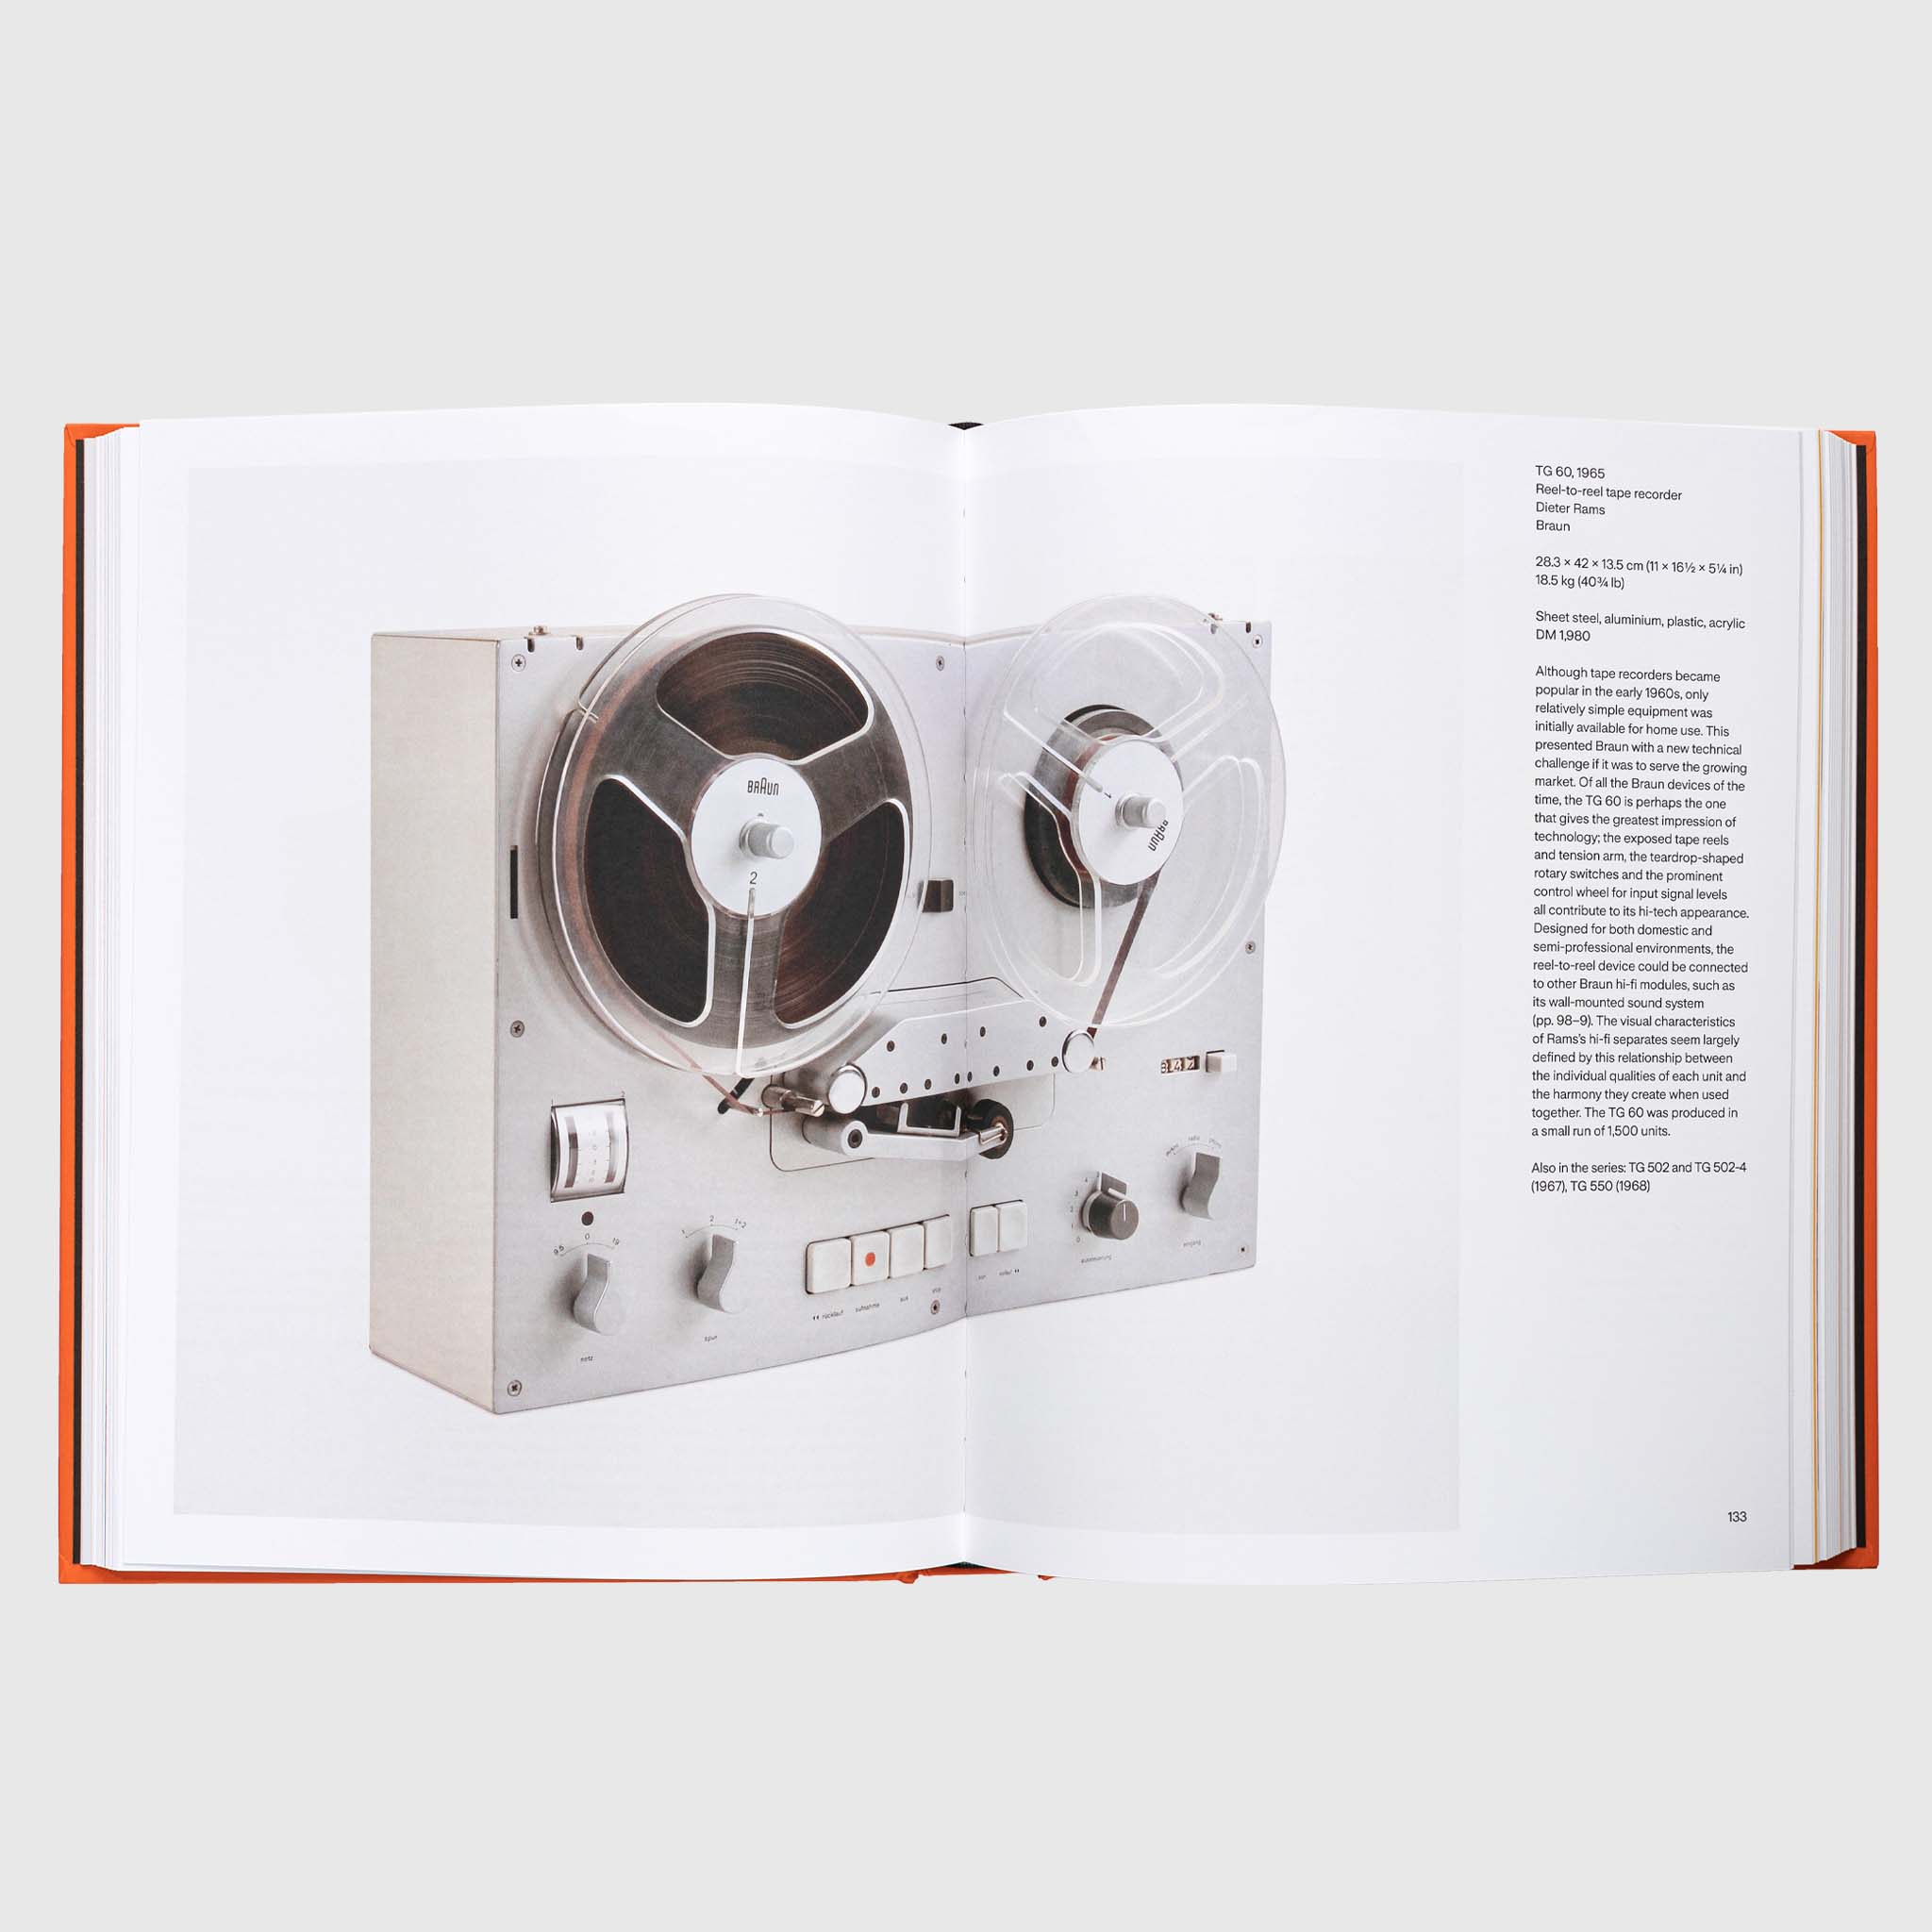 DIETER RAMS: THE COMPLETE WORKS – PACKER SHOES